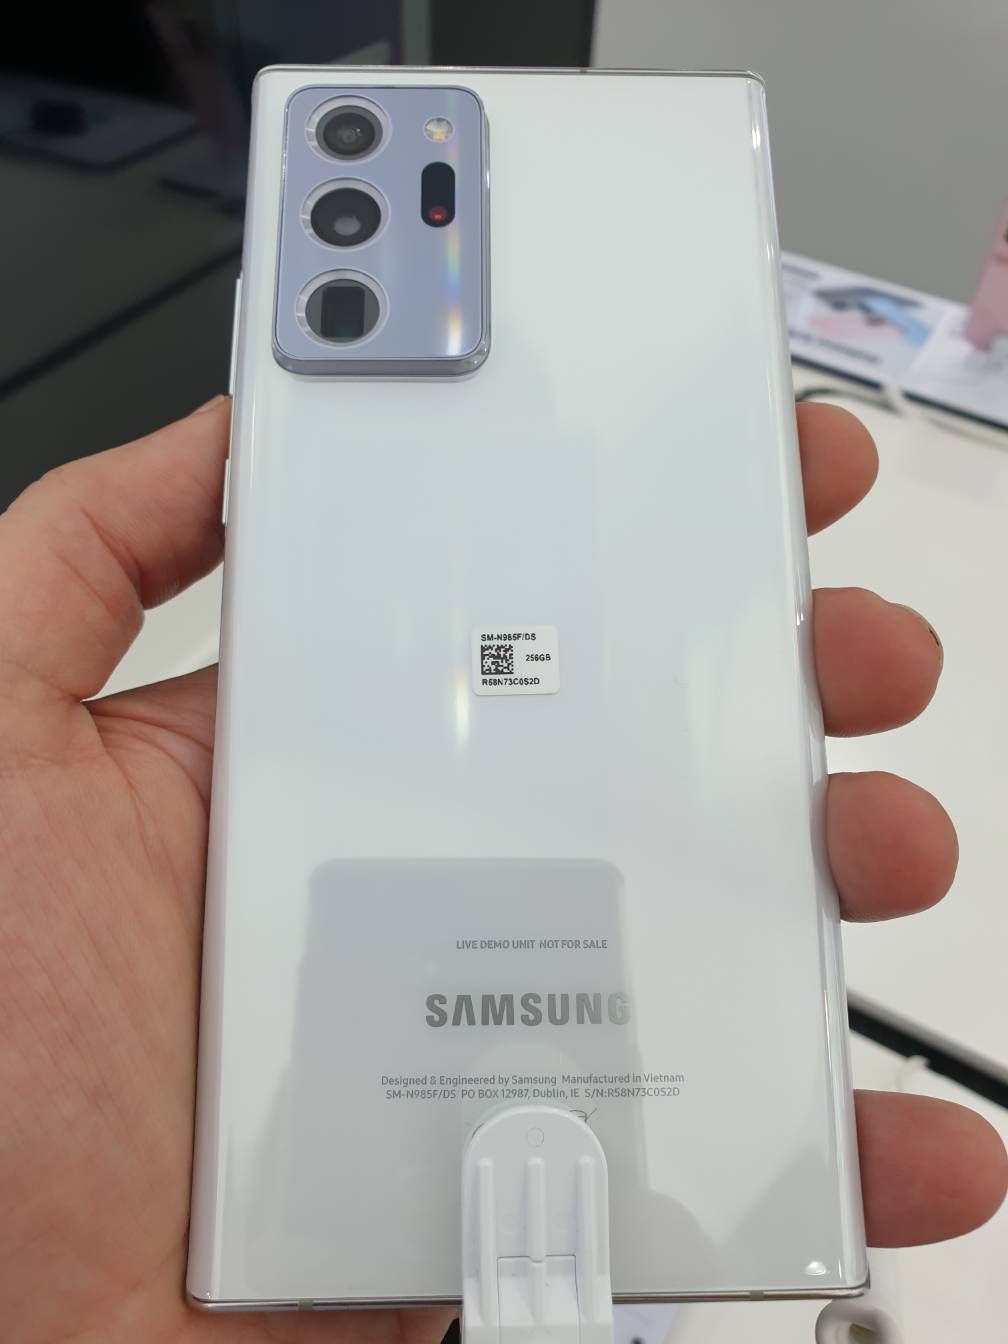 Samsung Galaxy Note20 Ultra appears in Mystic White shade